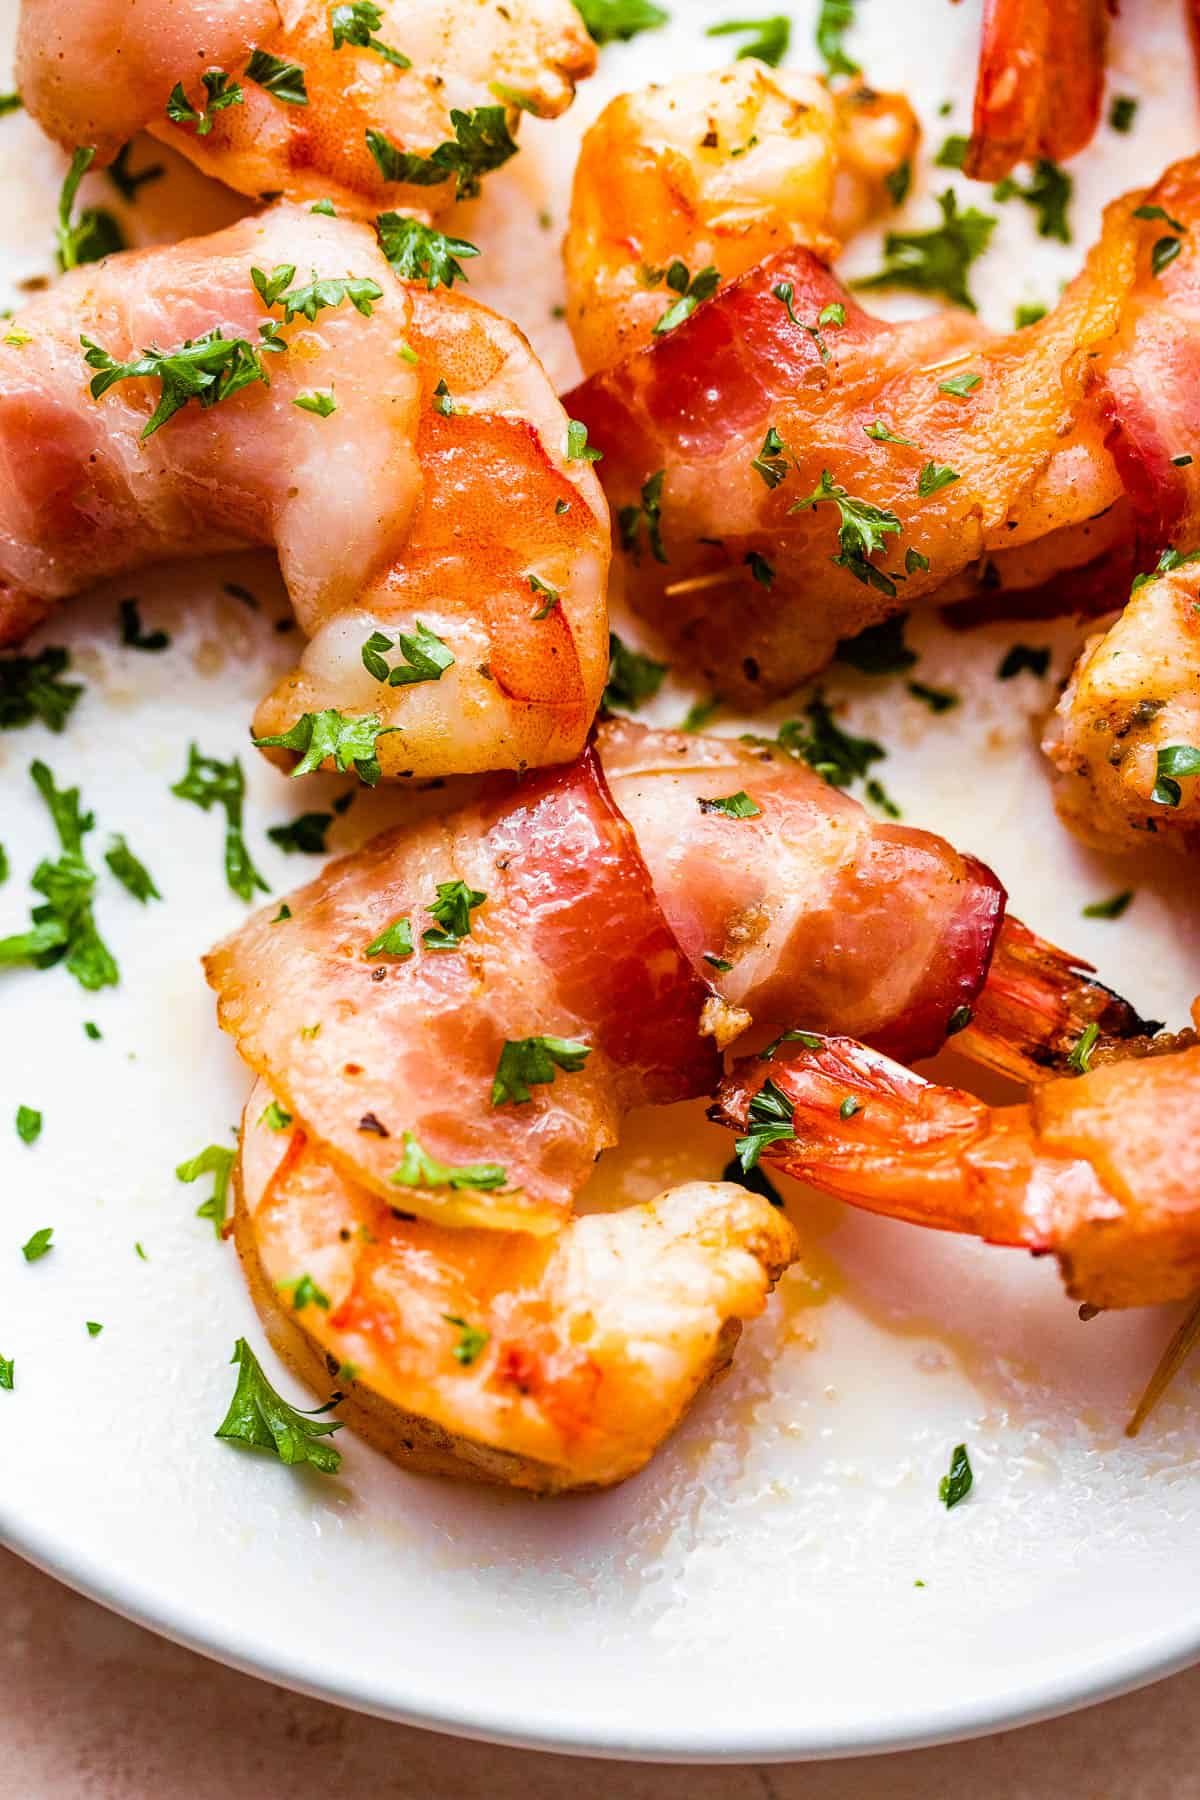 bacon wrapped shrimp arranged on a white serving plate and garnished with parsley